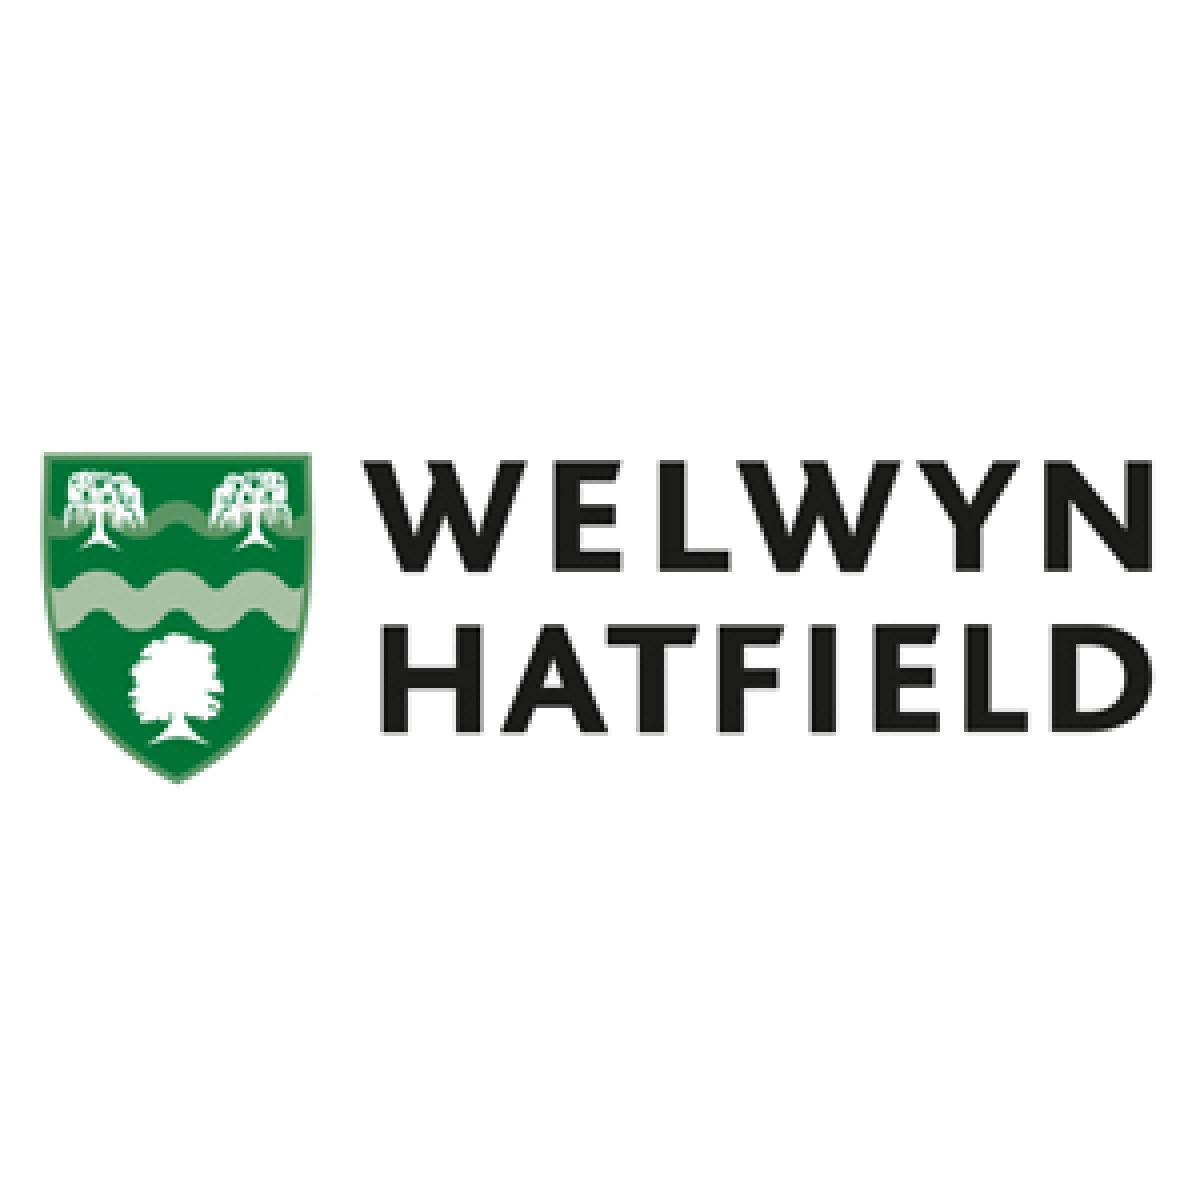 Maydencroft Awarded The Welwyn Hatfield Borough Council Arboricultural Services Contract